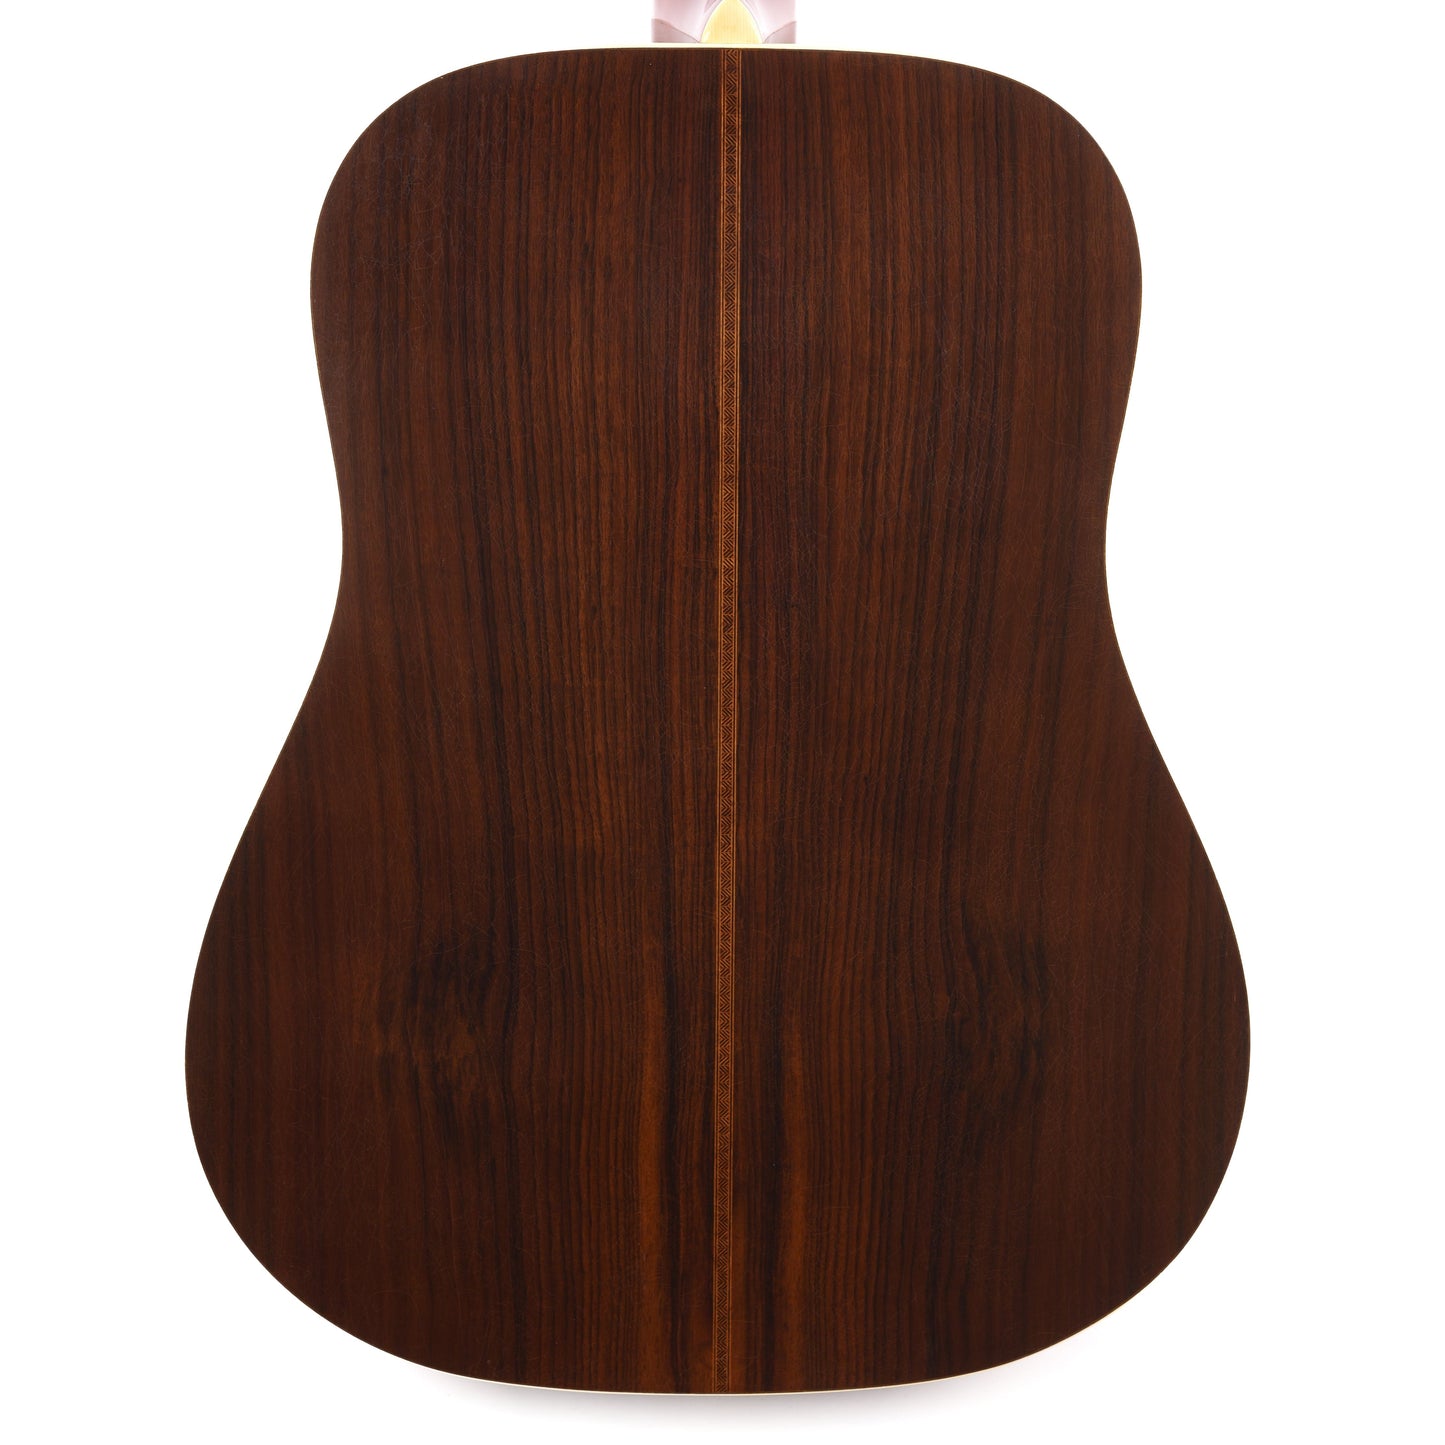 Atkin D37 Baked Sitka/Rosewood Aged Natural Acoustic Guitars / Dreadnought